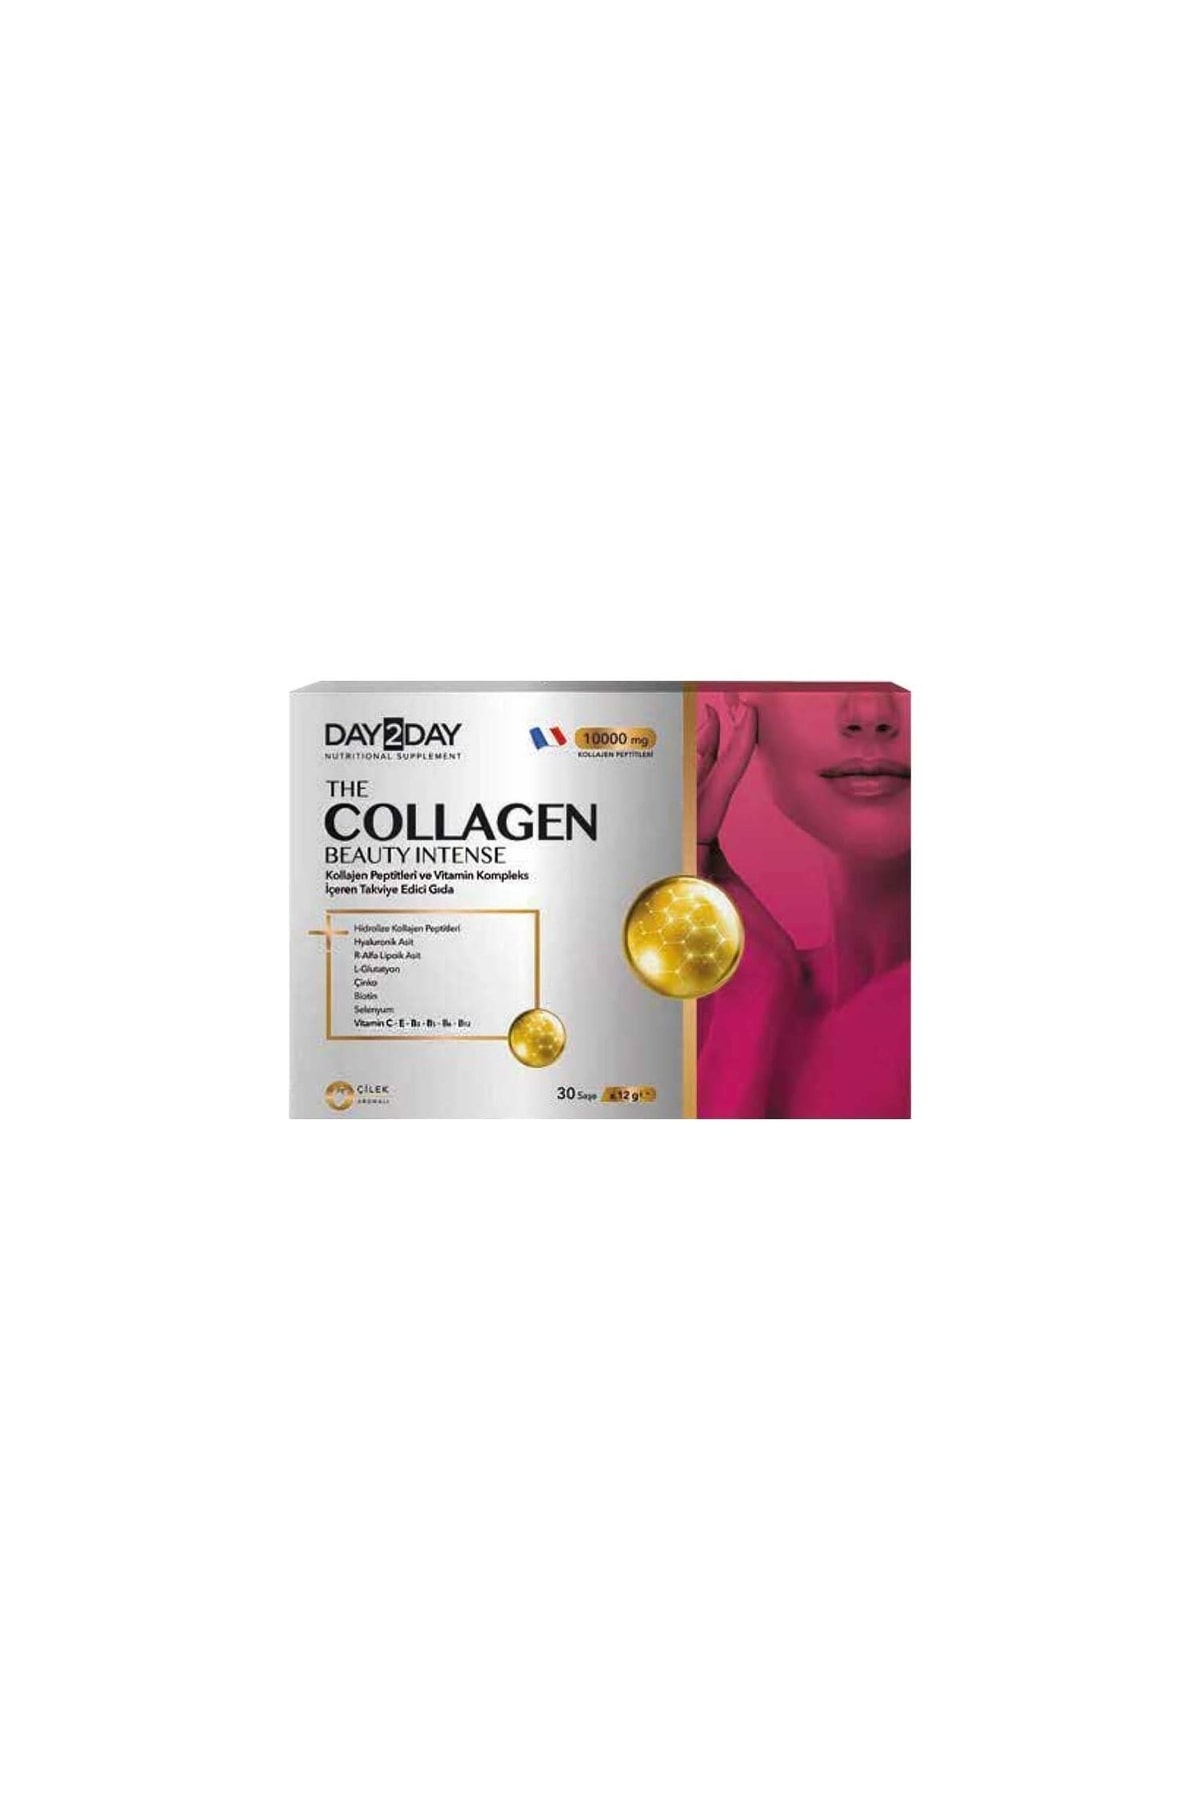 DAY2DAY The Collagen Beauty Intense 30 Saşe